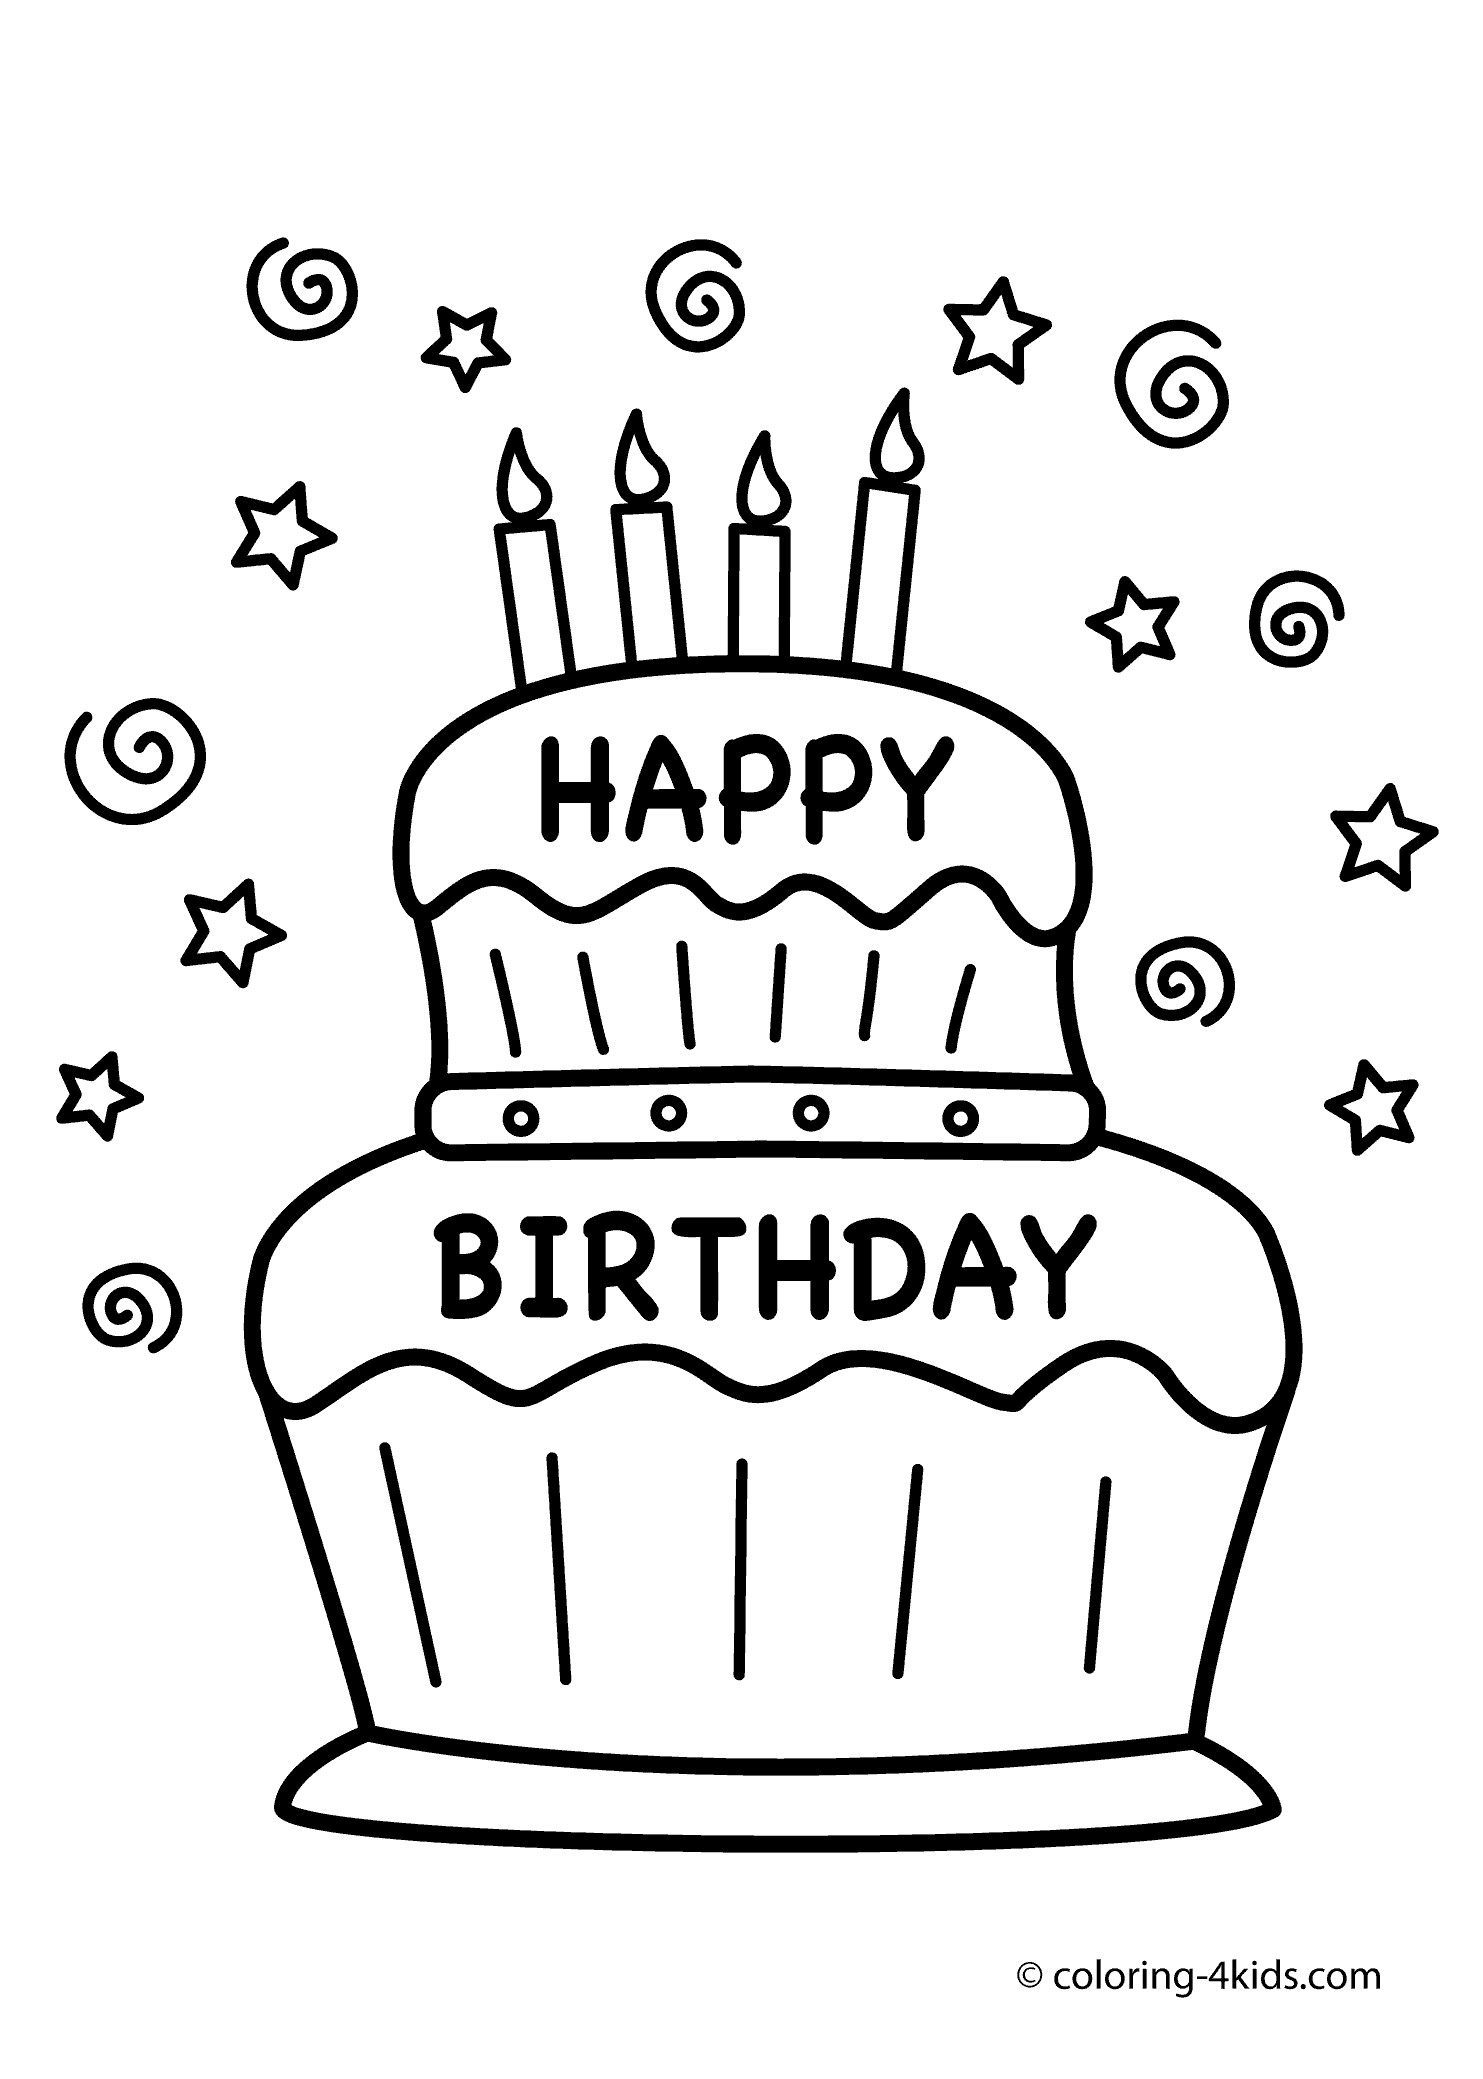 Best ideas about Birthday Cake Template
. Save or Pin Cake Drawing Template at GetDrawings Now.